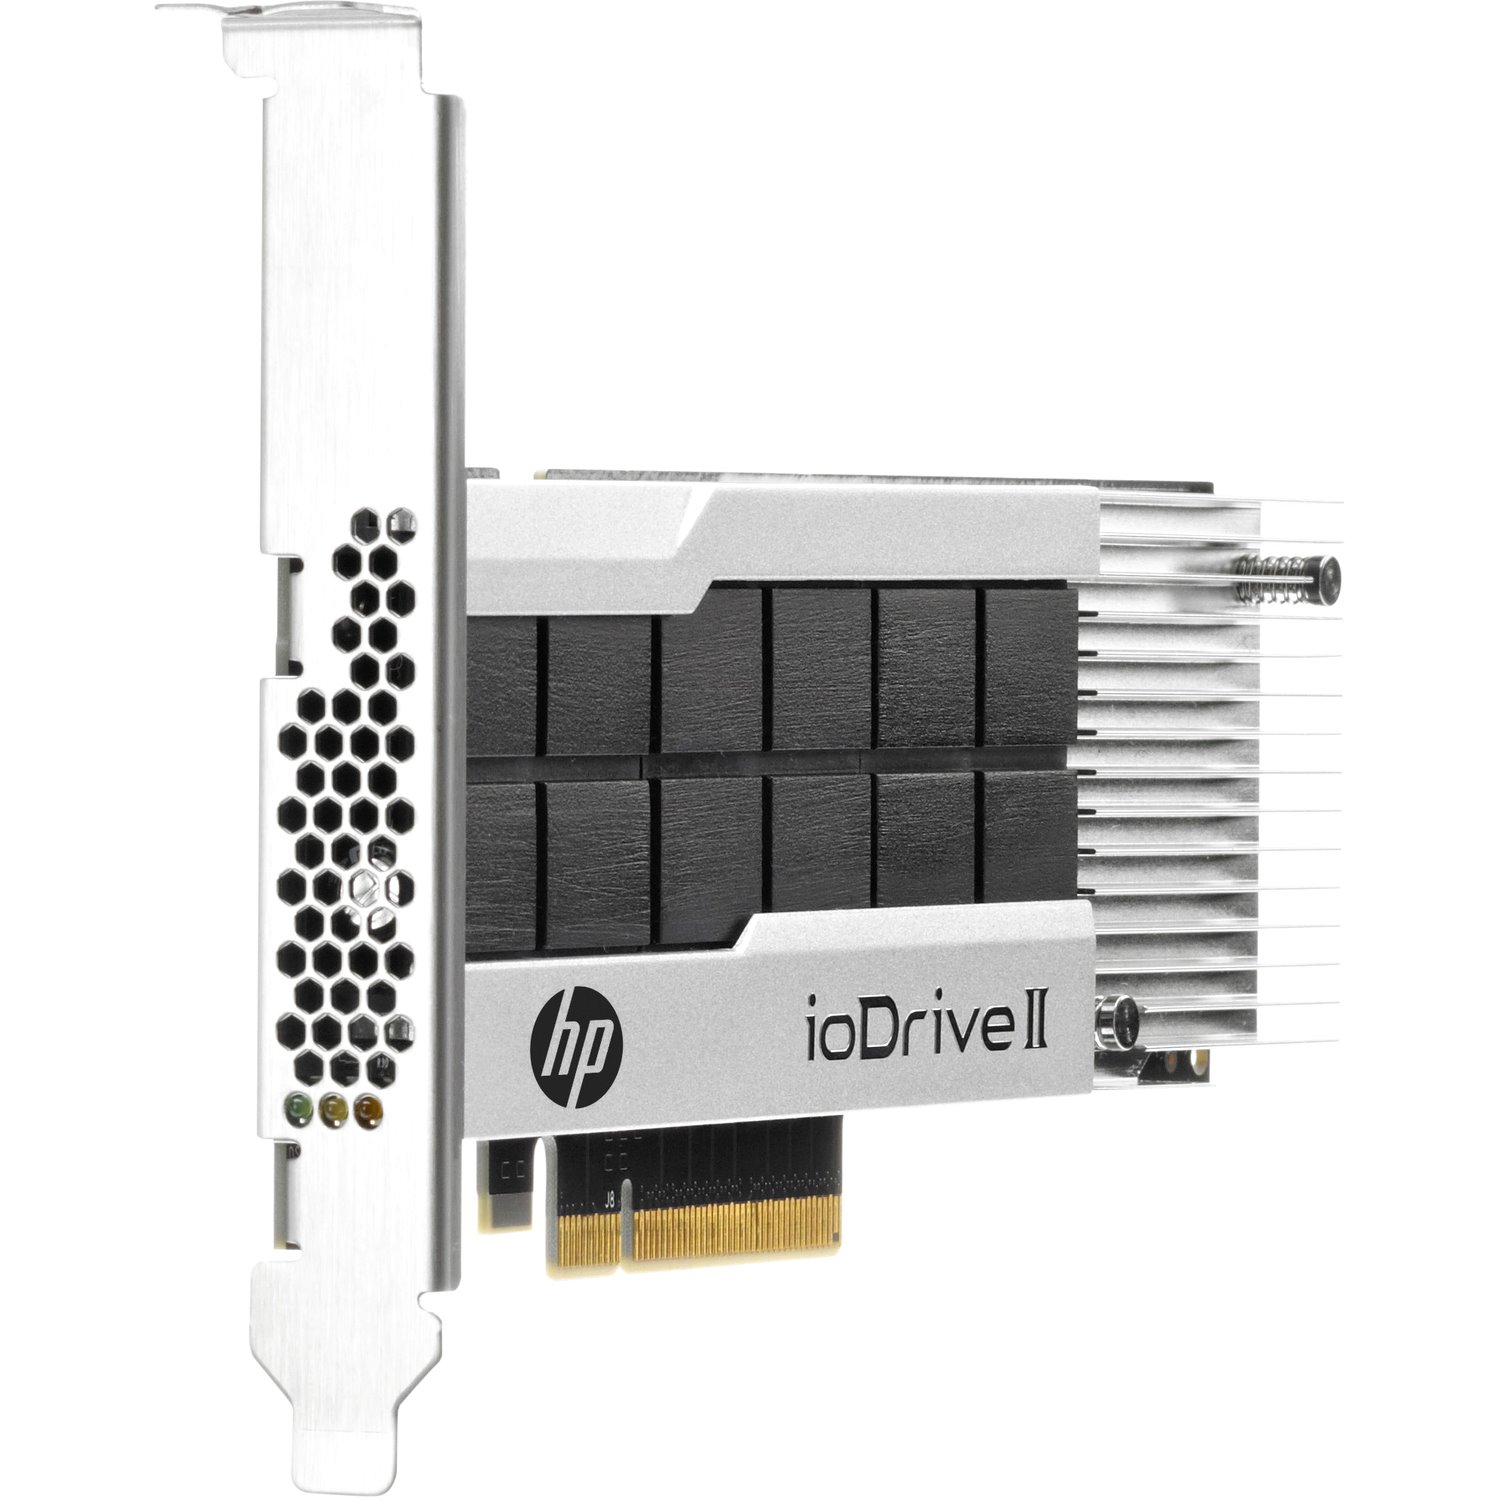 HPE Sourcing ioDrive2 365 GB Solid State Drive - Internal - PCI Express